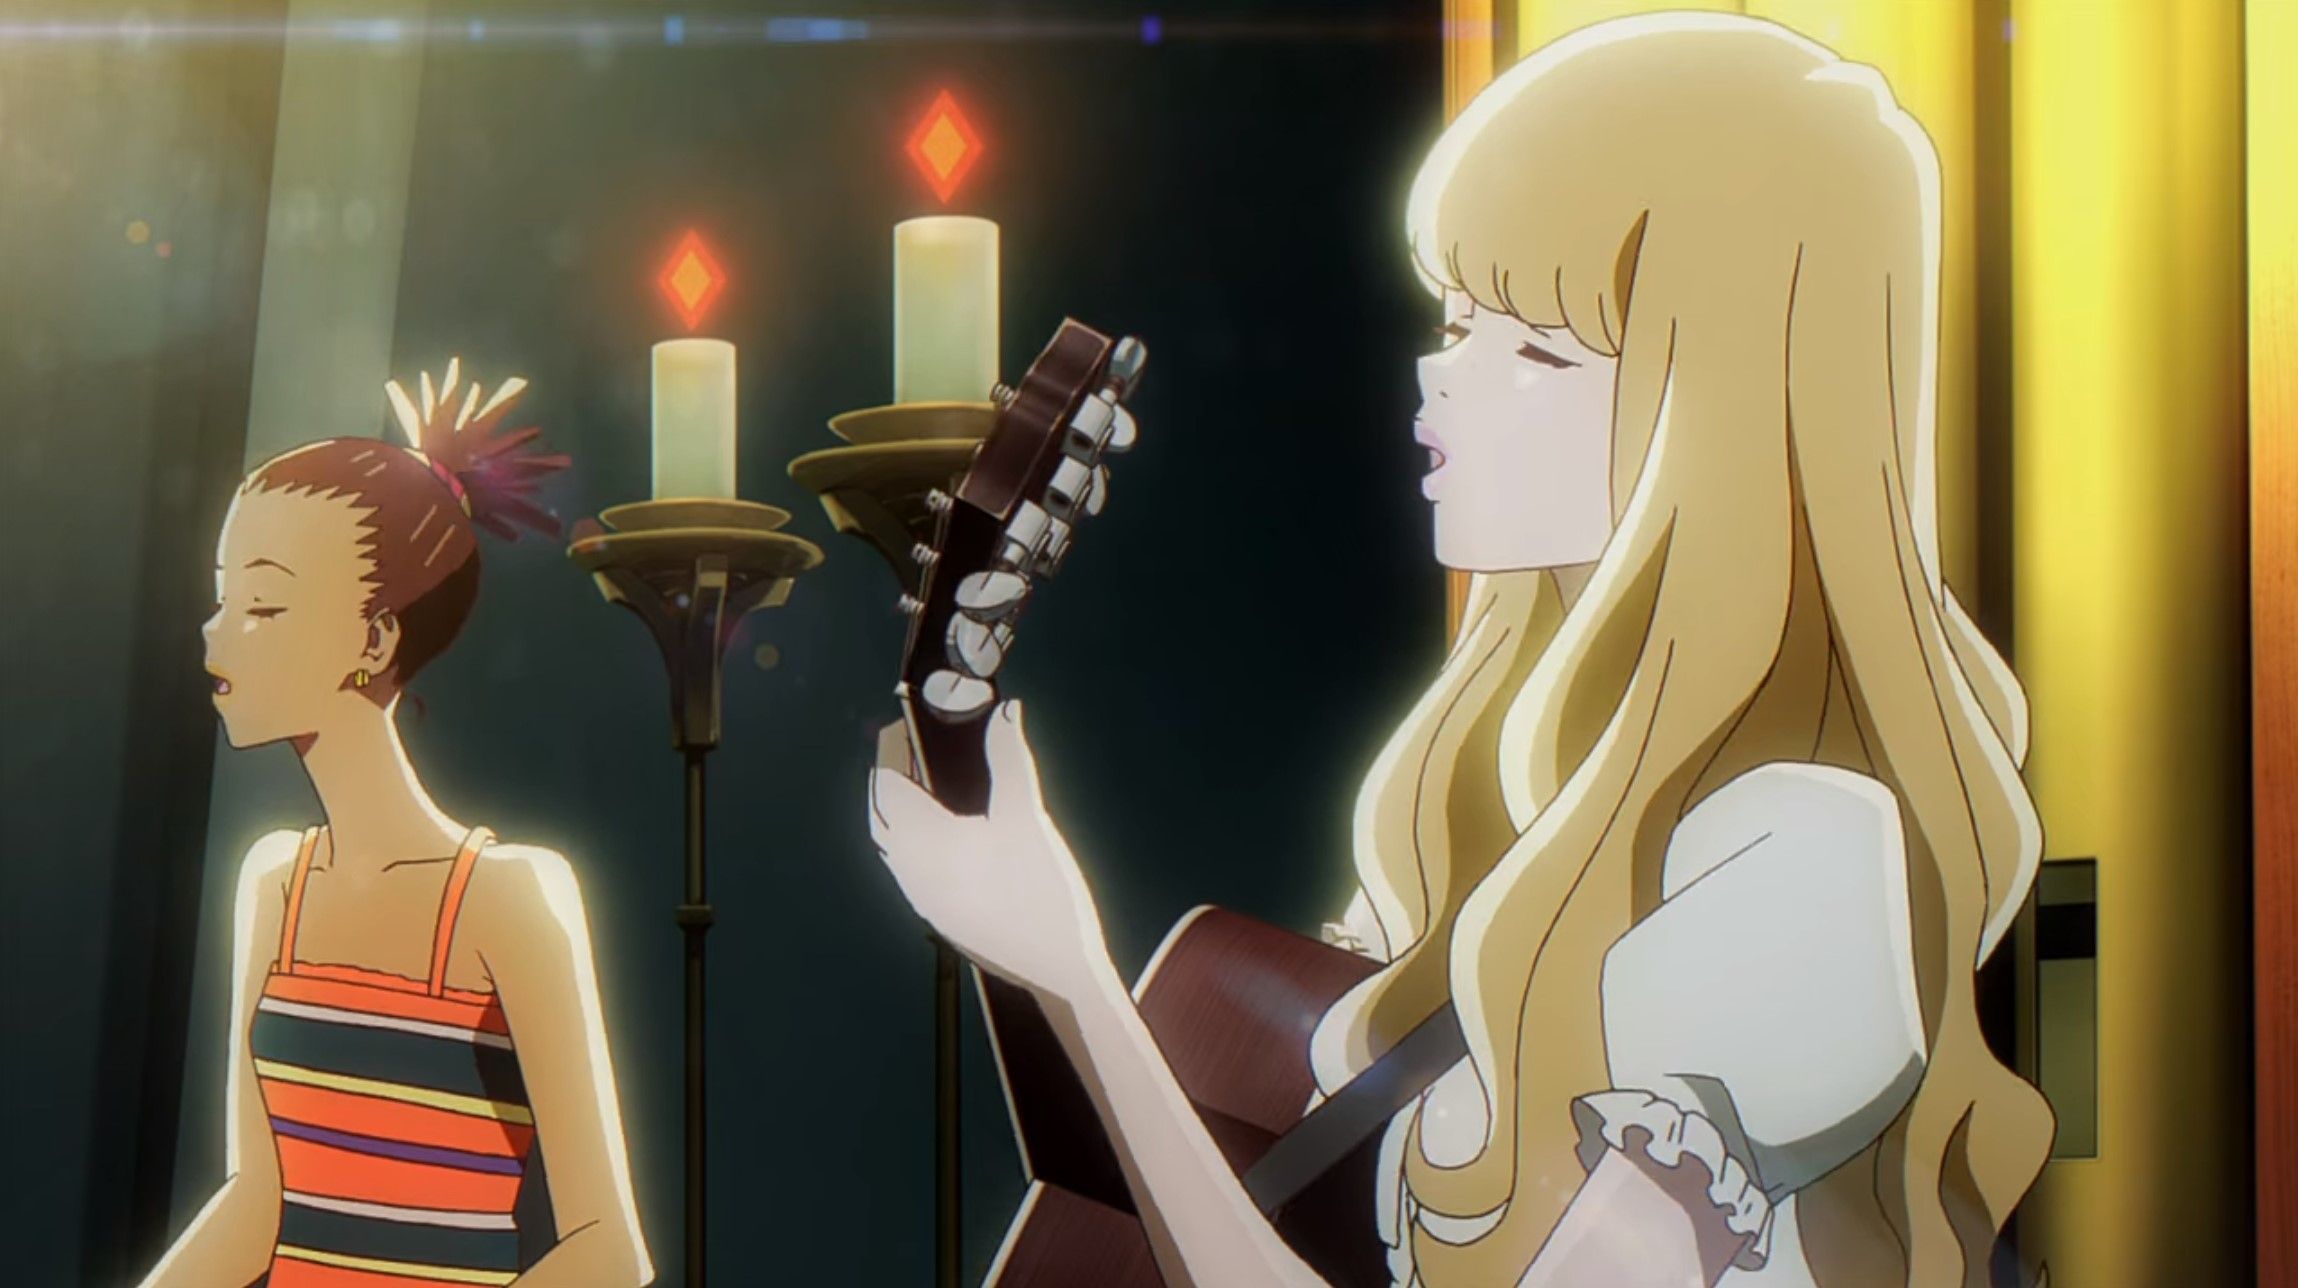 Carole & Tuesday: The 5 Best Songs from the Anime Series